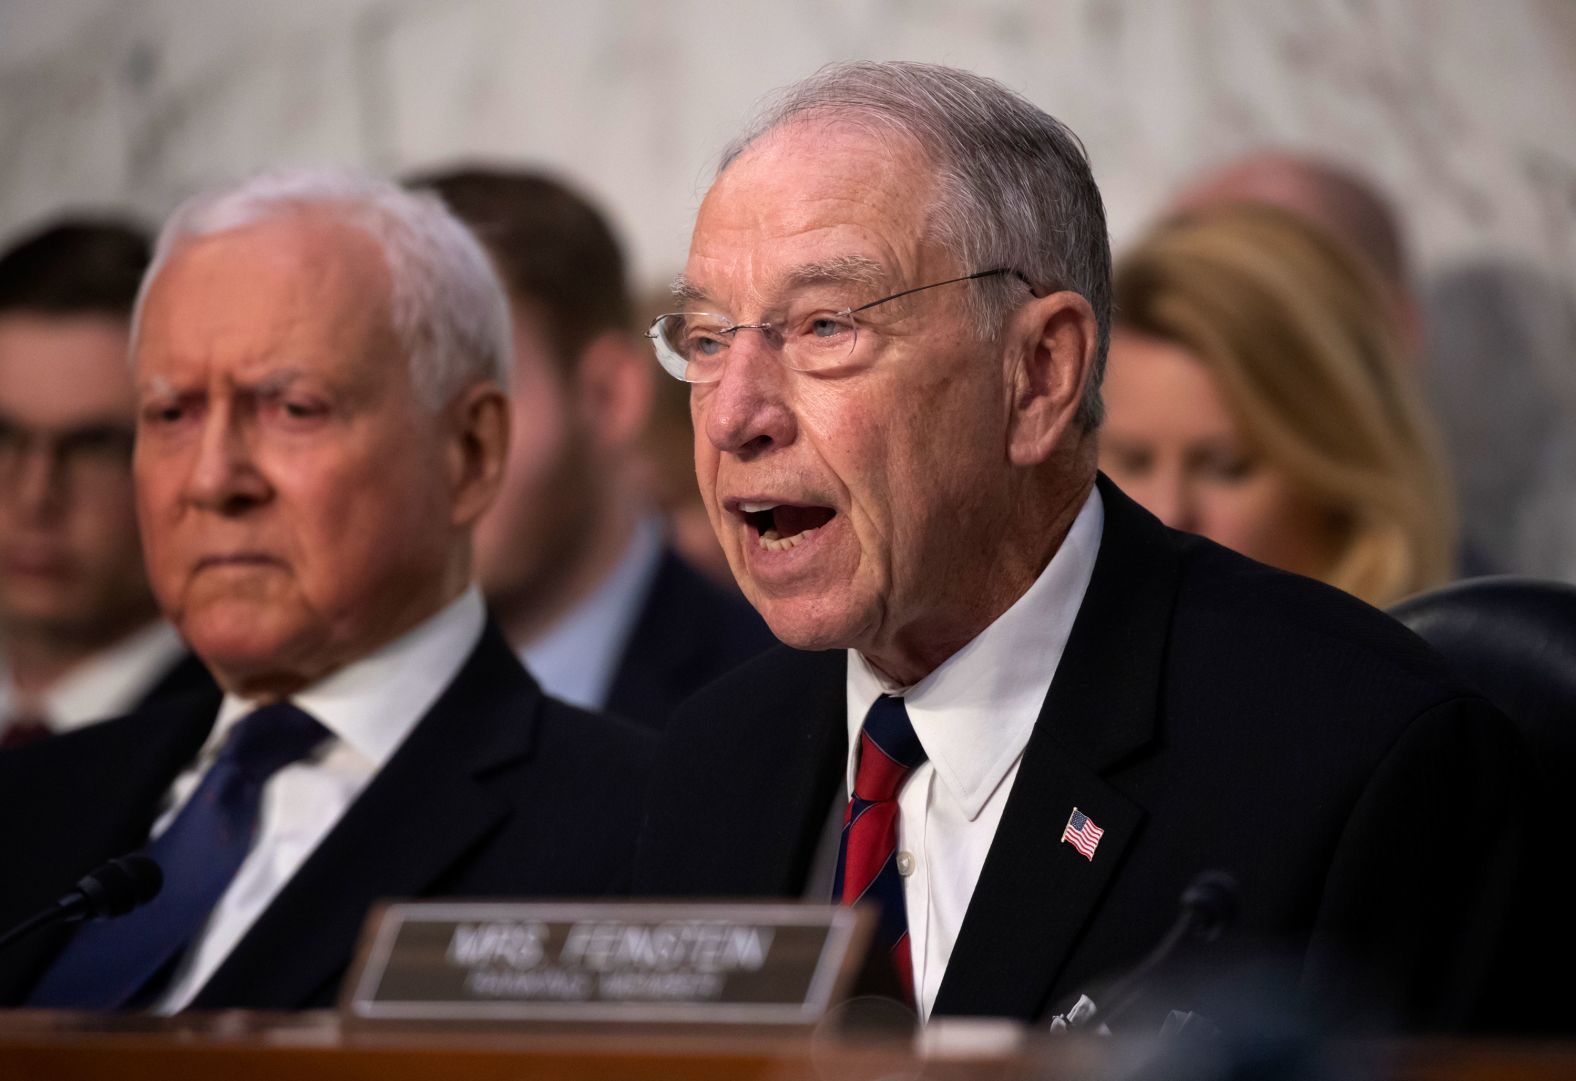 Sen. Chuck Grassley, the Republican chairman of the Senate Judiciary Committee, delivers his opening remarks Tuesday more than an hour after the hearing began.